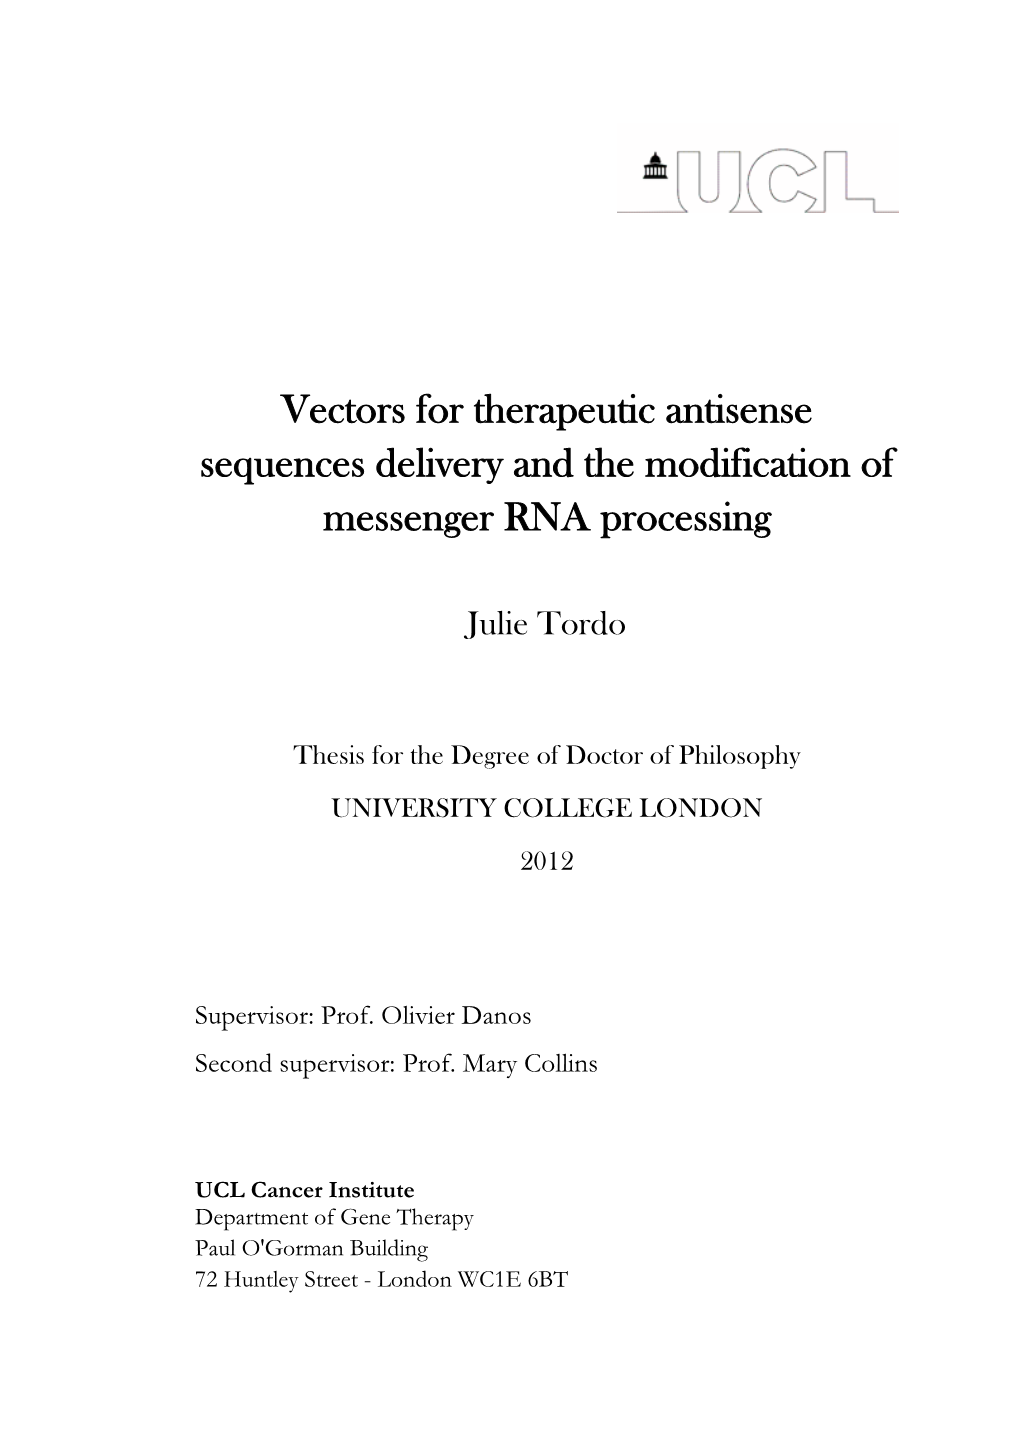 Vectors for Therapeutic Antisense Sequences Delivery and the Modification of Messenger RNA Processing